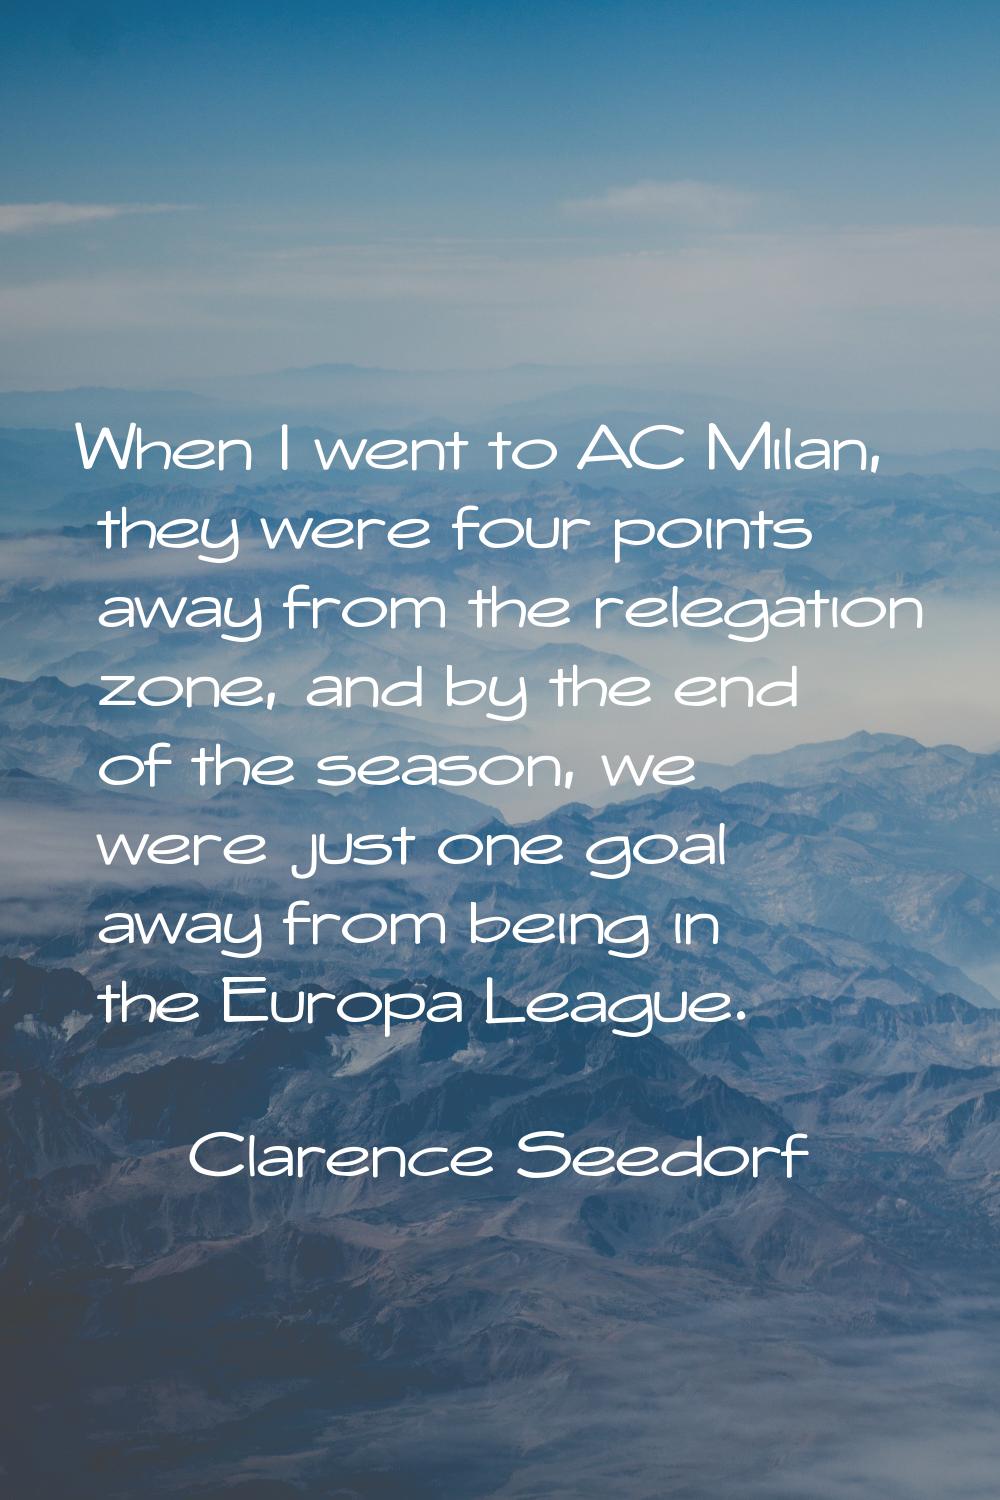 When I went to AC Milan, they were four points away from the relegation zone, and by the end of the